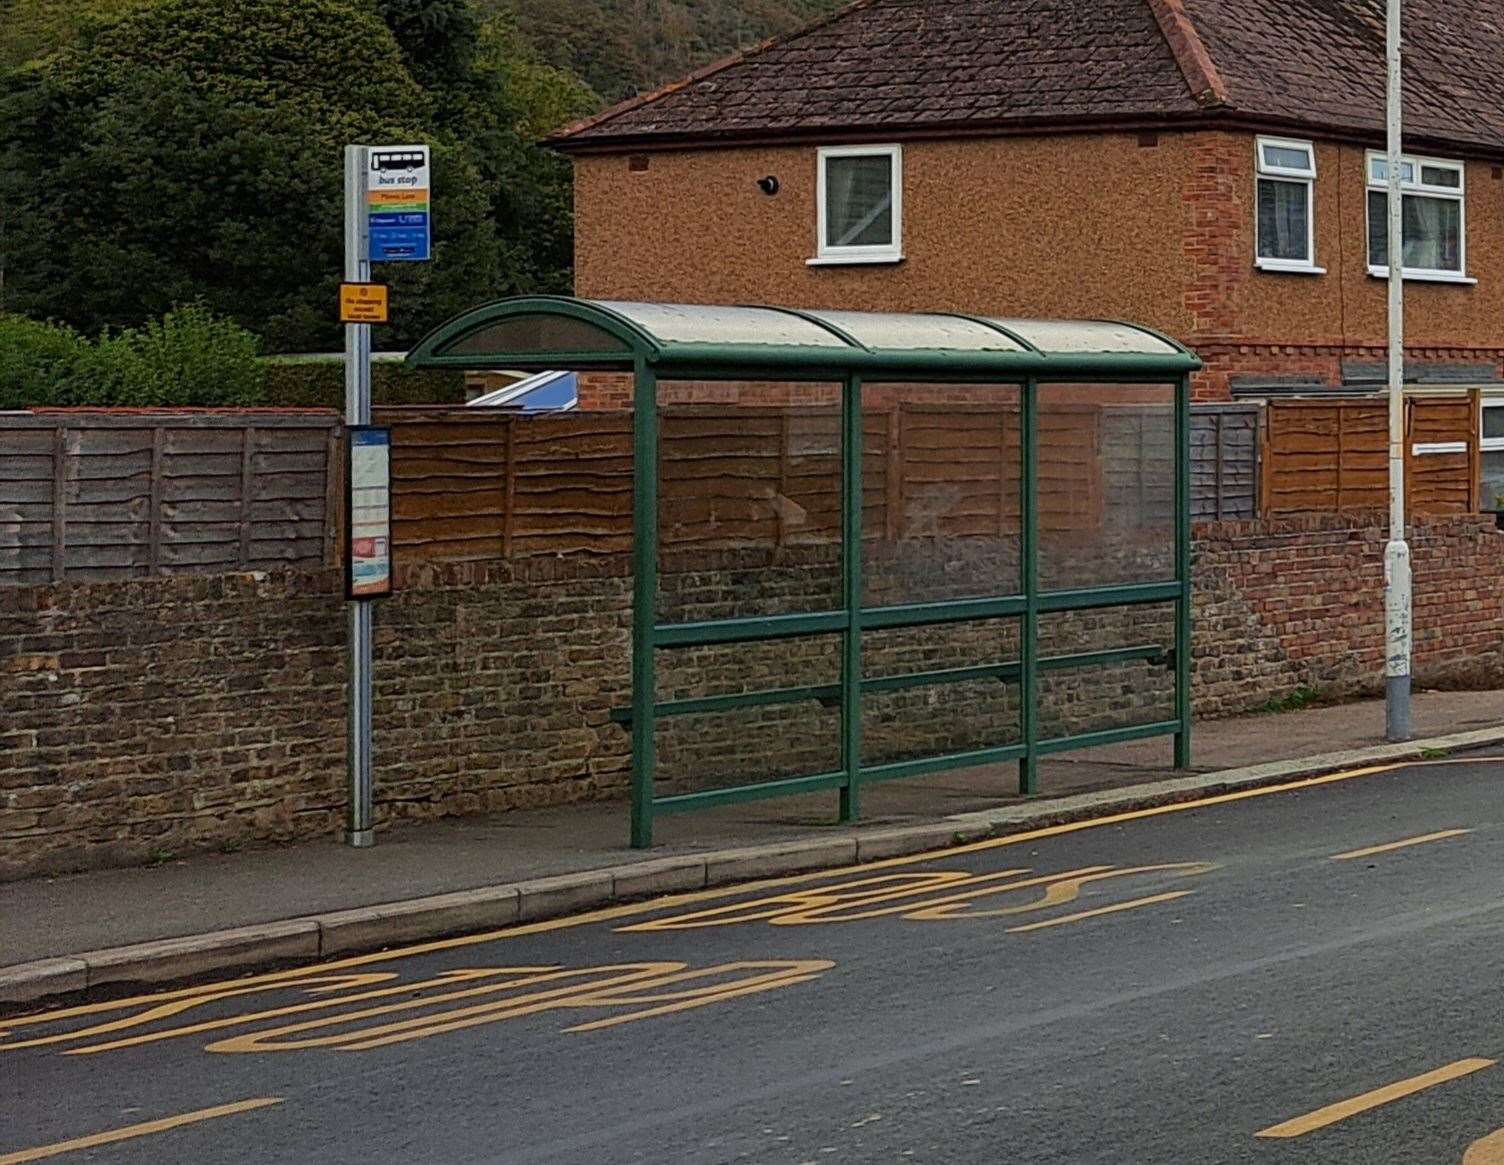 The bus stop in River, which connects people from the village to Dover town centre